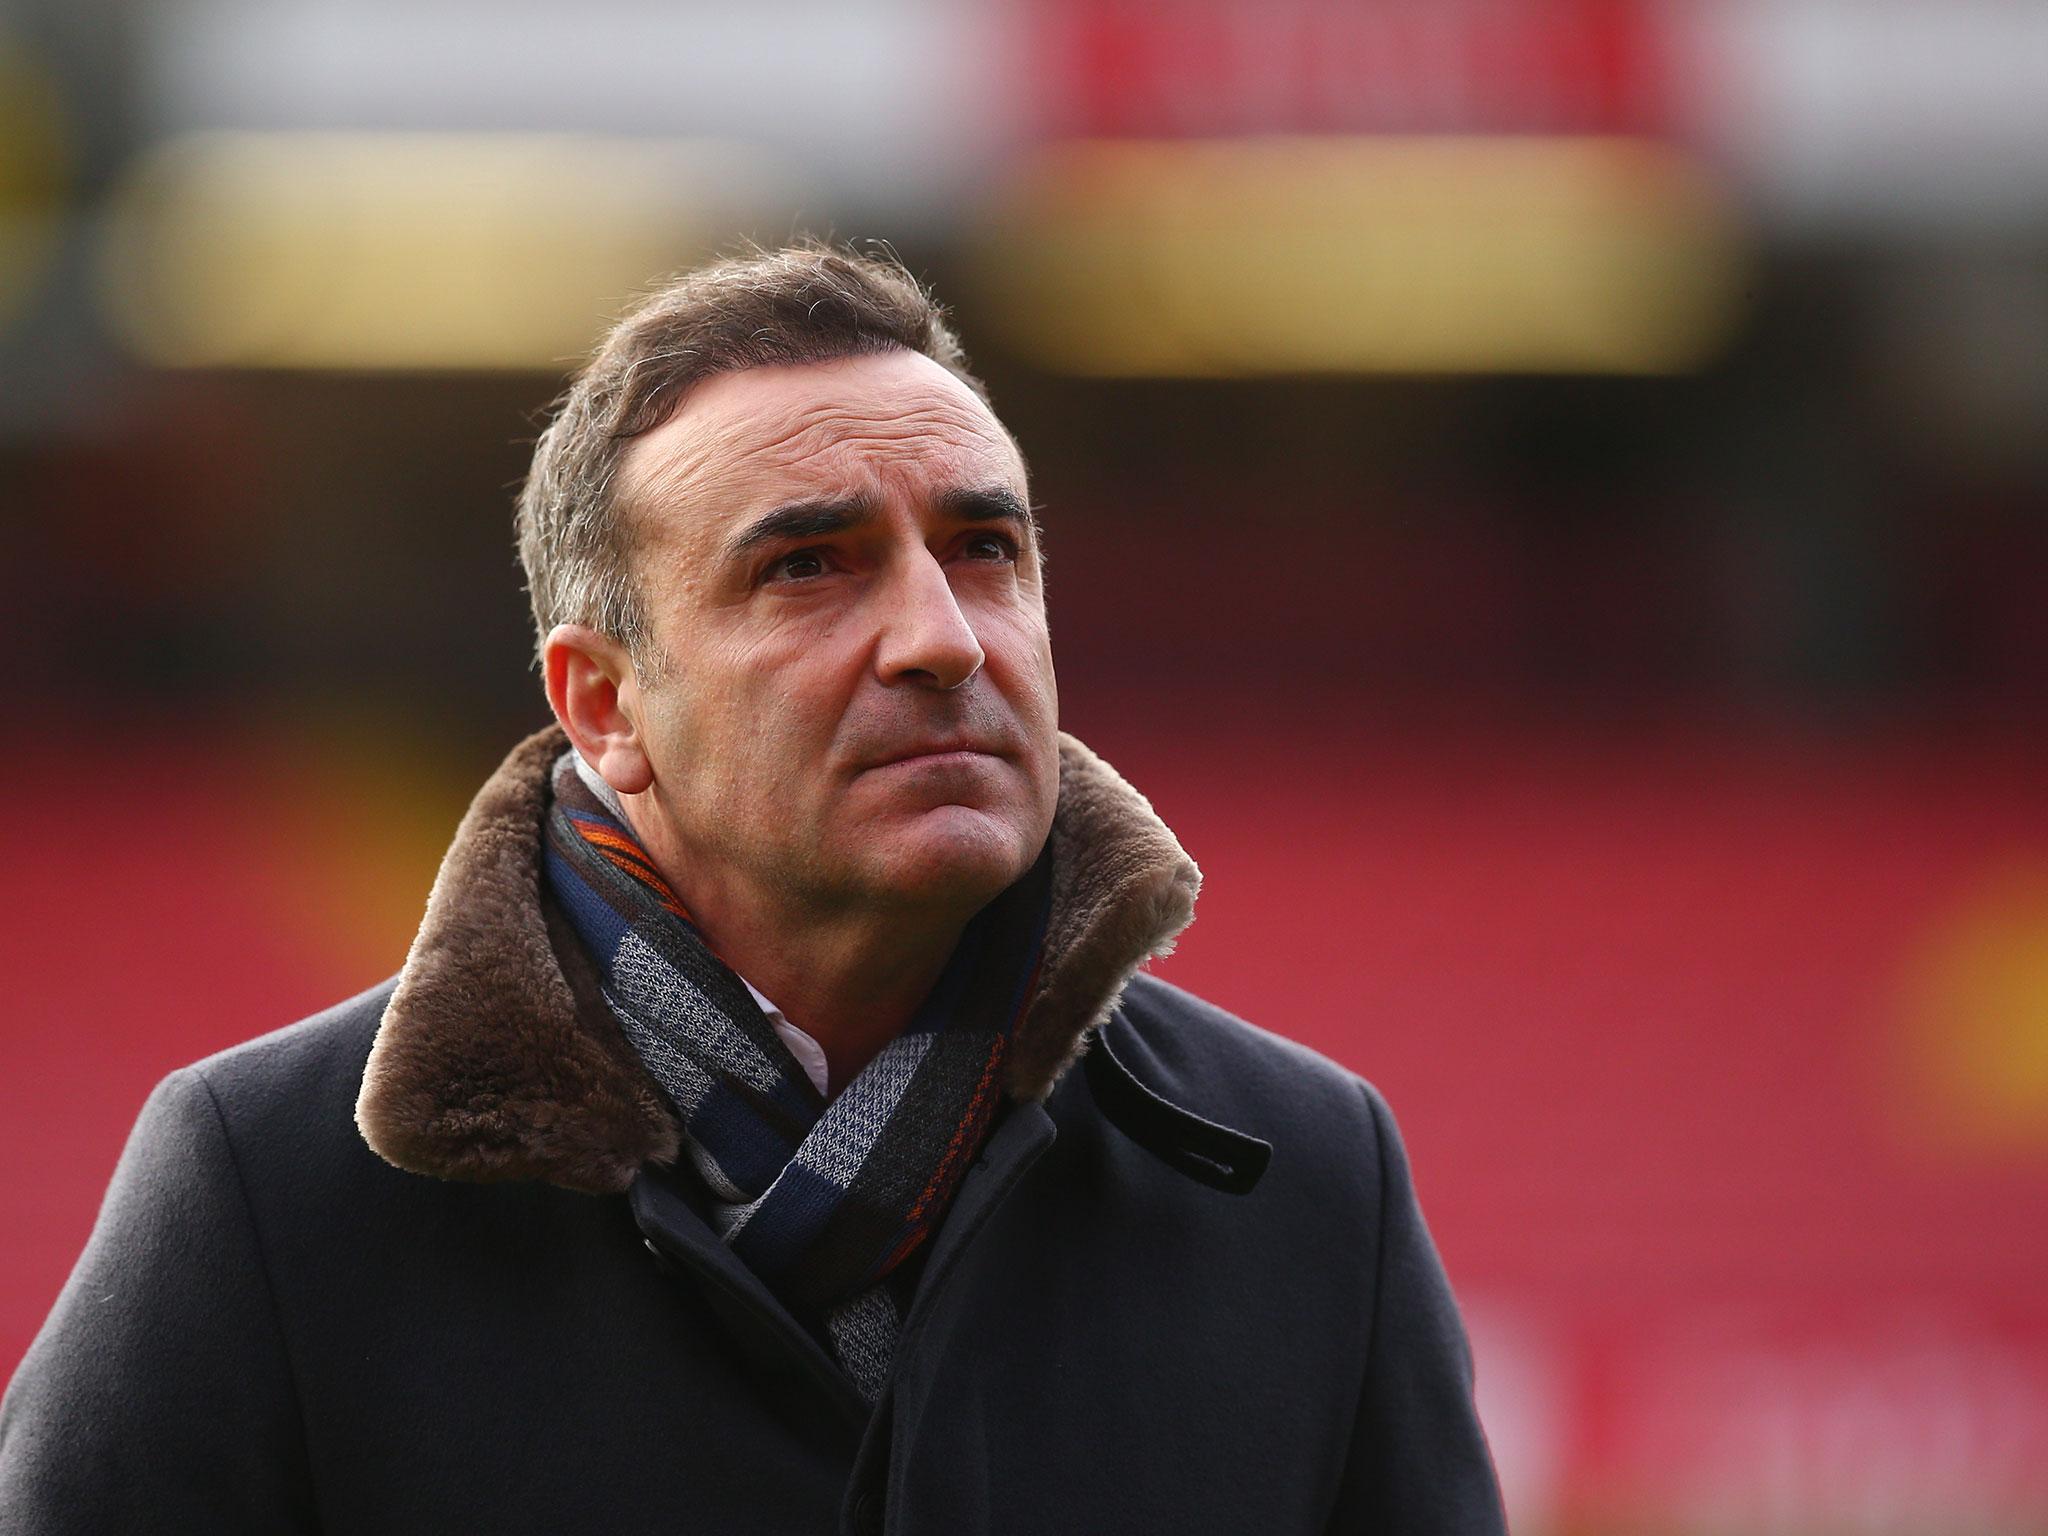 Carlos Carvalhal's first game in charge ended in victory at Watford